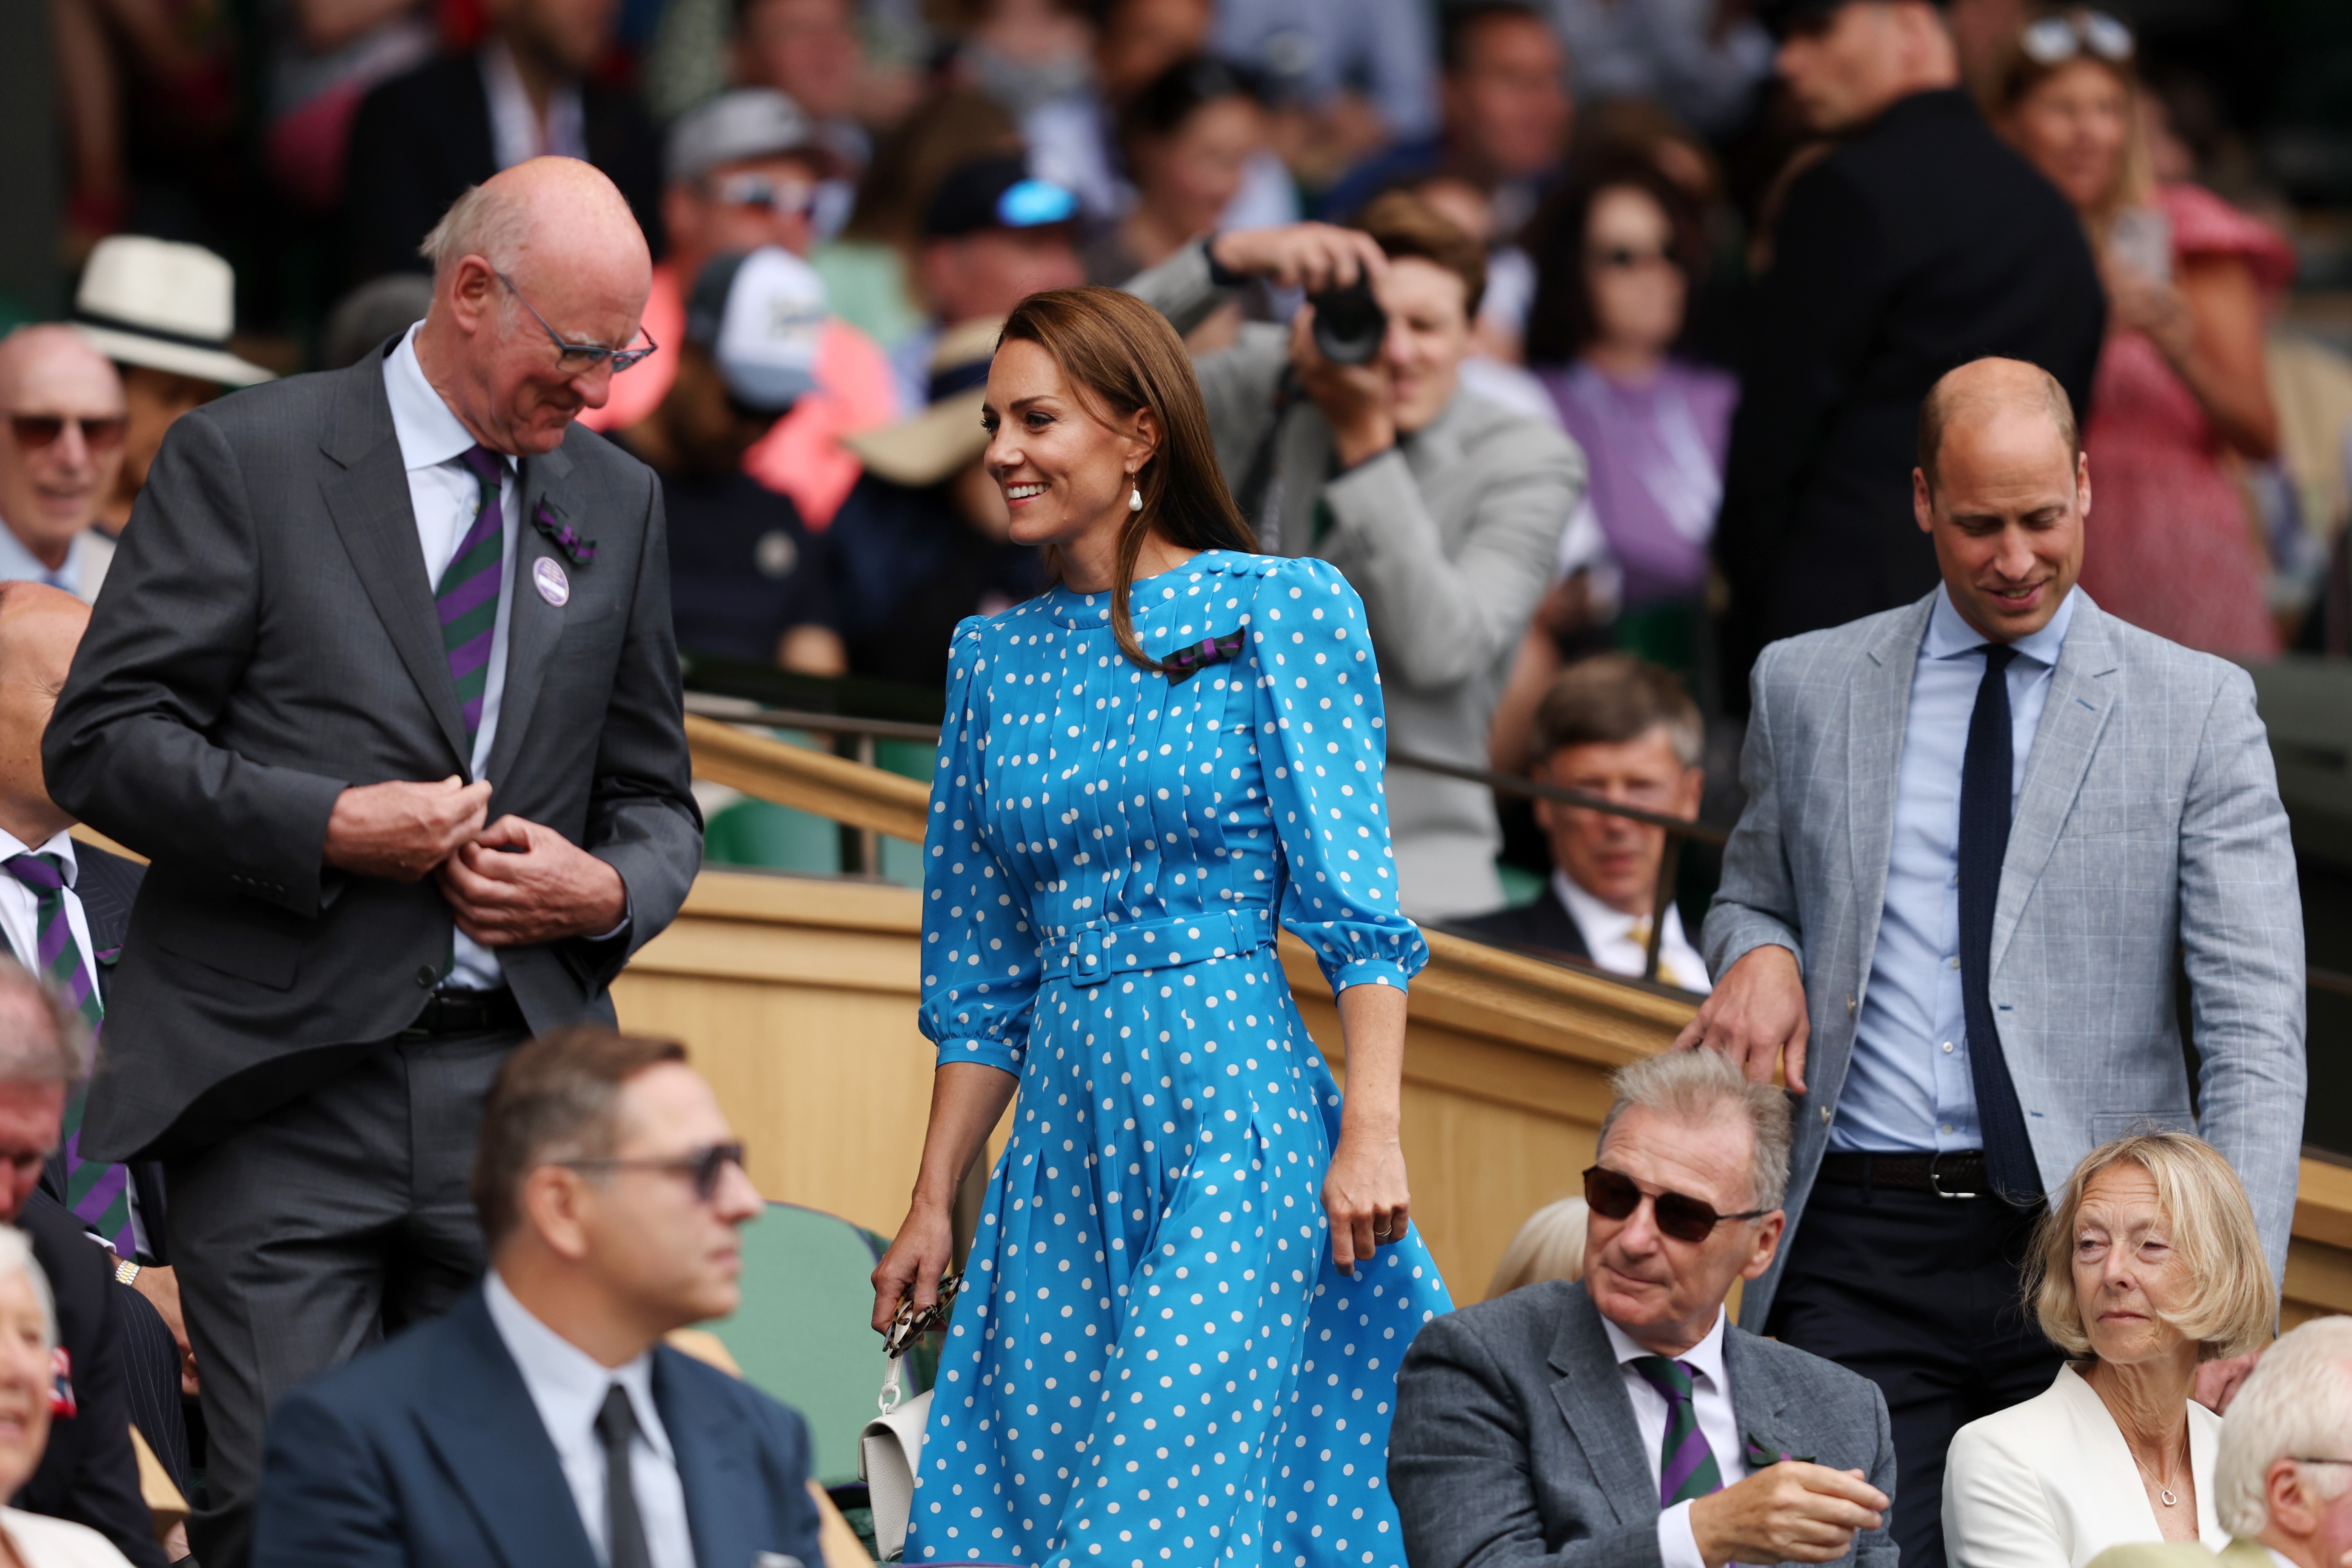 LONDON, ENGLAND - JULY 05: Catherine, Duchess of Cambridge and Prince William, Duke of Cambridge are seen in the Royal Box before Novak Djokovic of Serbia plays a forehand against Jannik Sinner of Italy during their Men's Singles Quarter Final match on da (Foto: Getty Images)